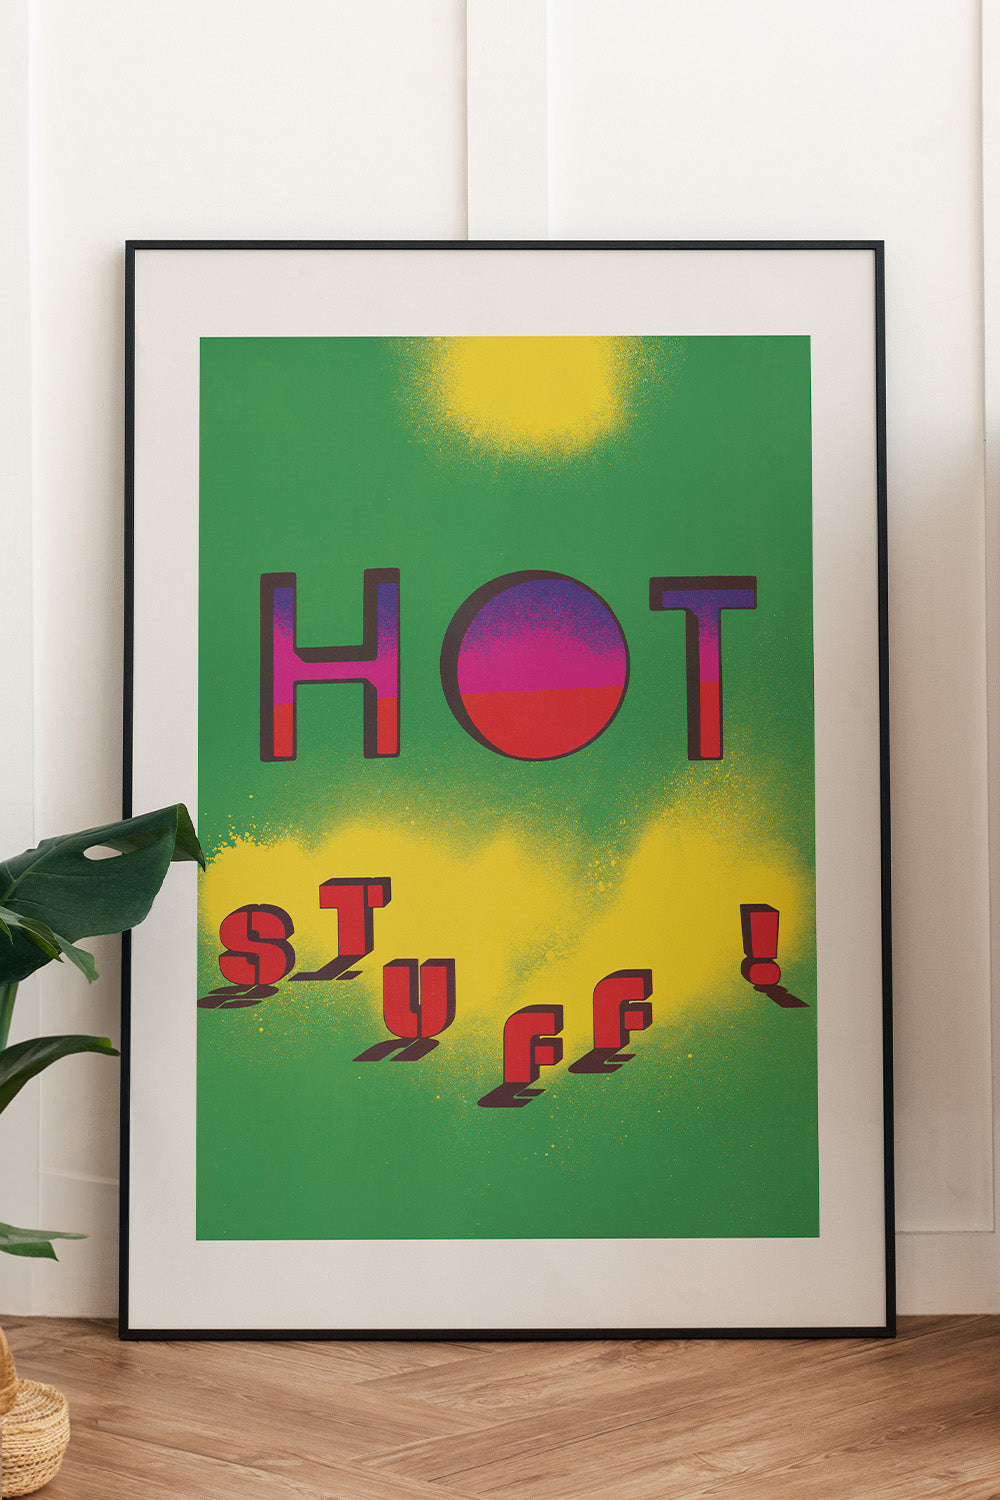 Vintage graphic of "Hot Stuff!" in colorful text on a bold green background.